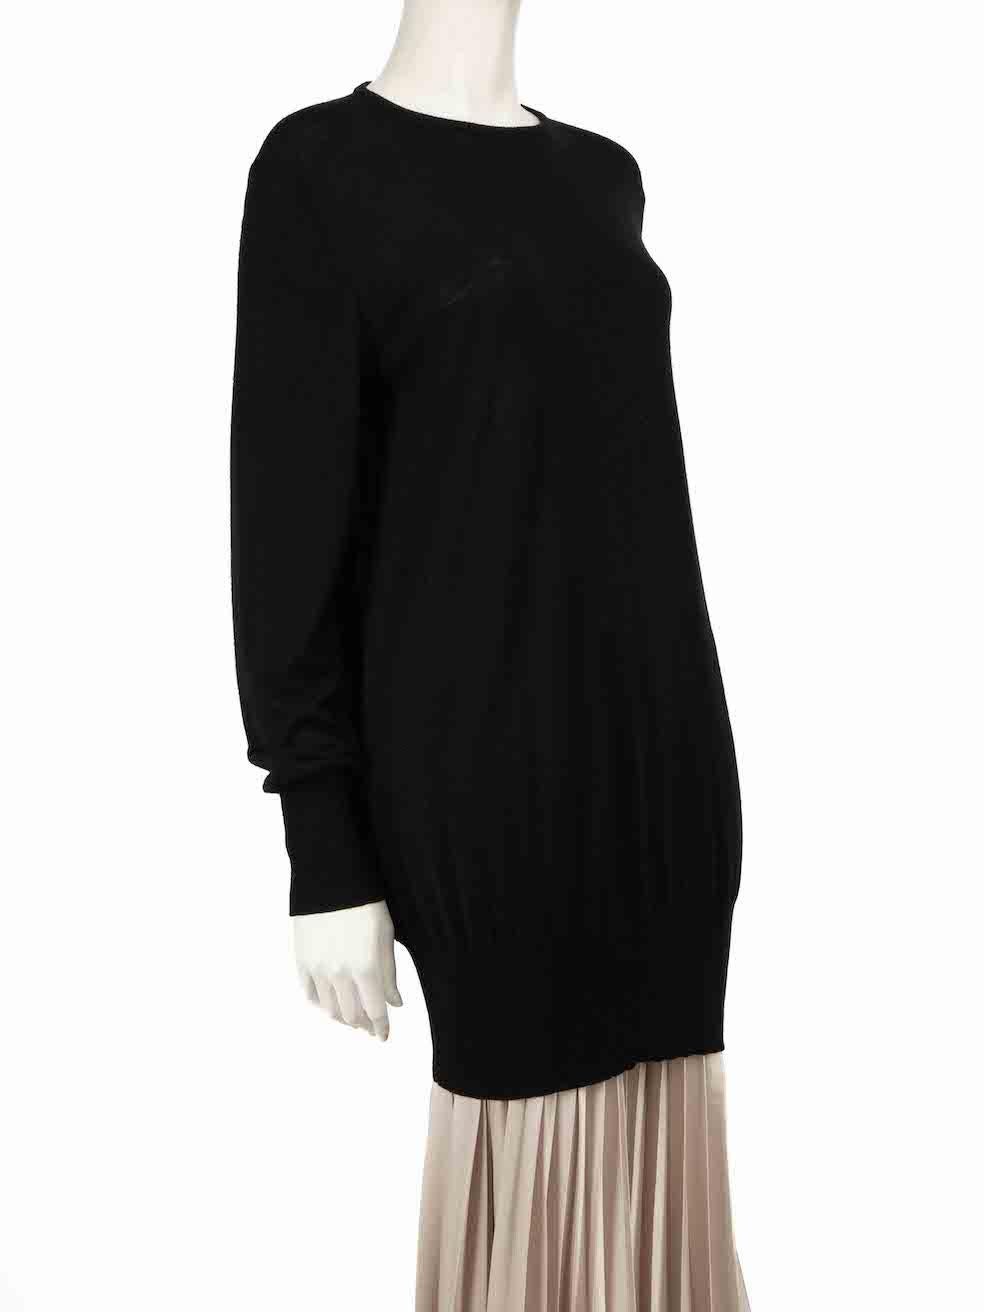 CONDITION is Very good. Minimal wear to jumper is evident. Minimal wear to the front with light pilling on this used Roberto Cavalli designer resale item.
 
 
 
 Details
 
 
 Black
 
 Wool
 
 Long sleeves jumper
 
 Knitted and stretchy
 
 Round